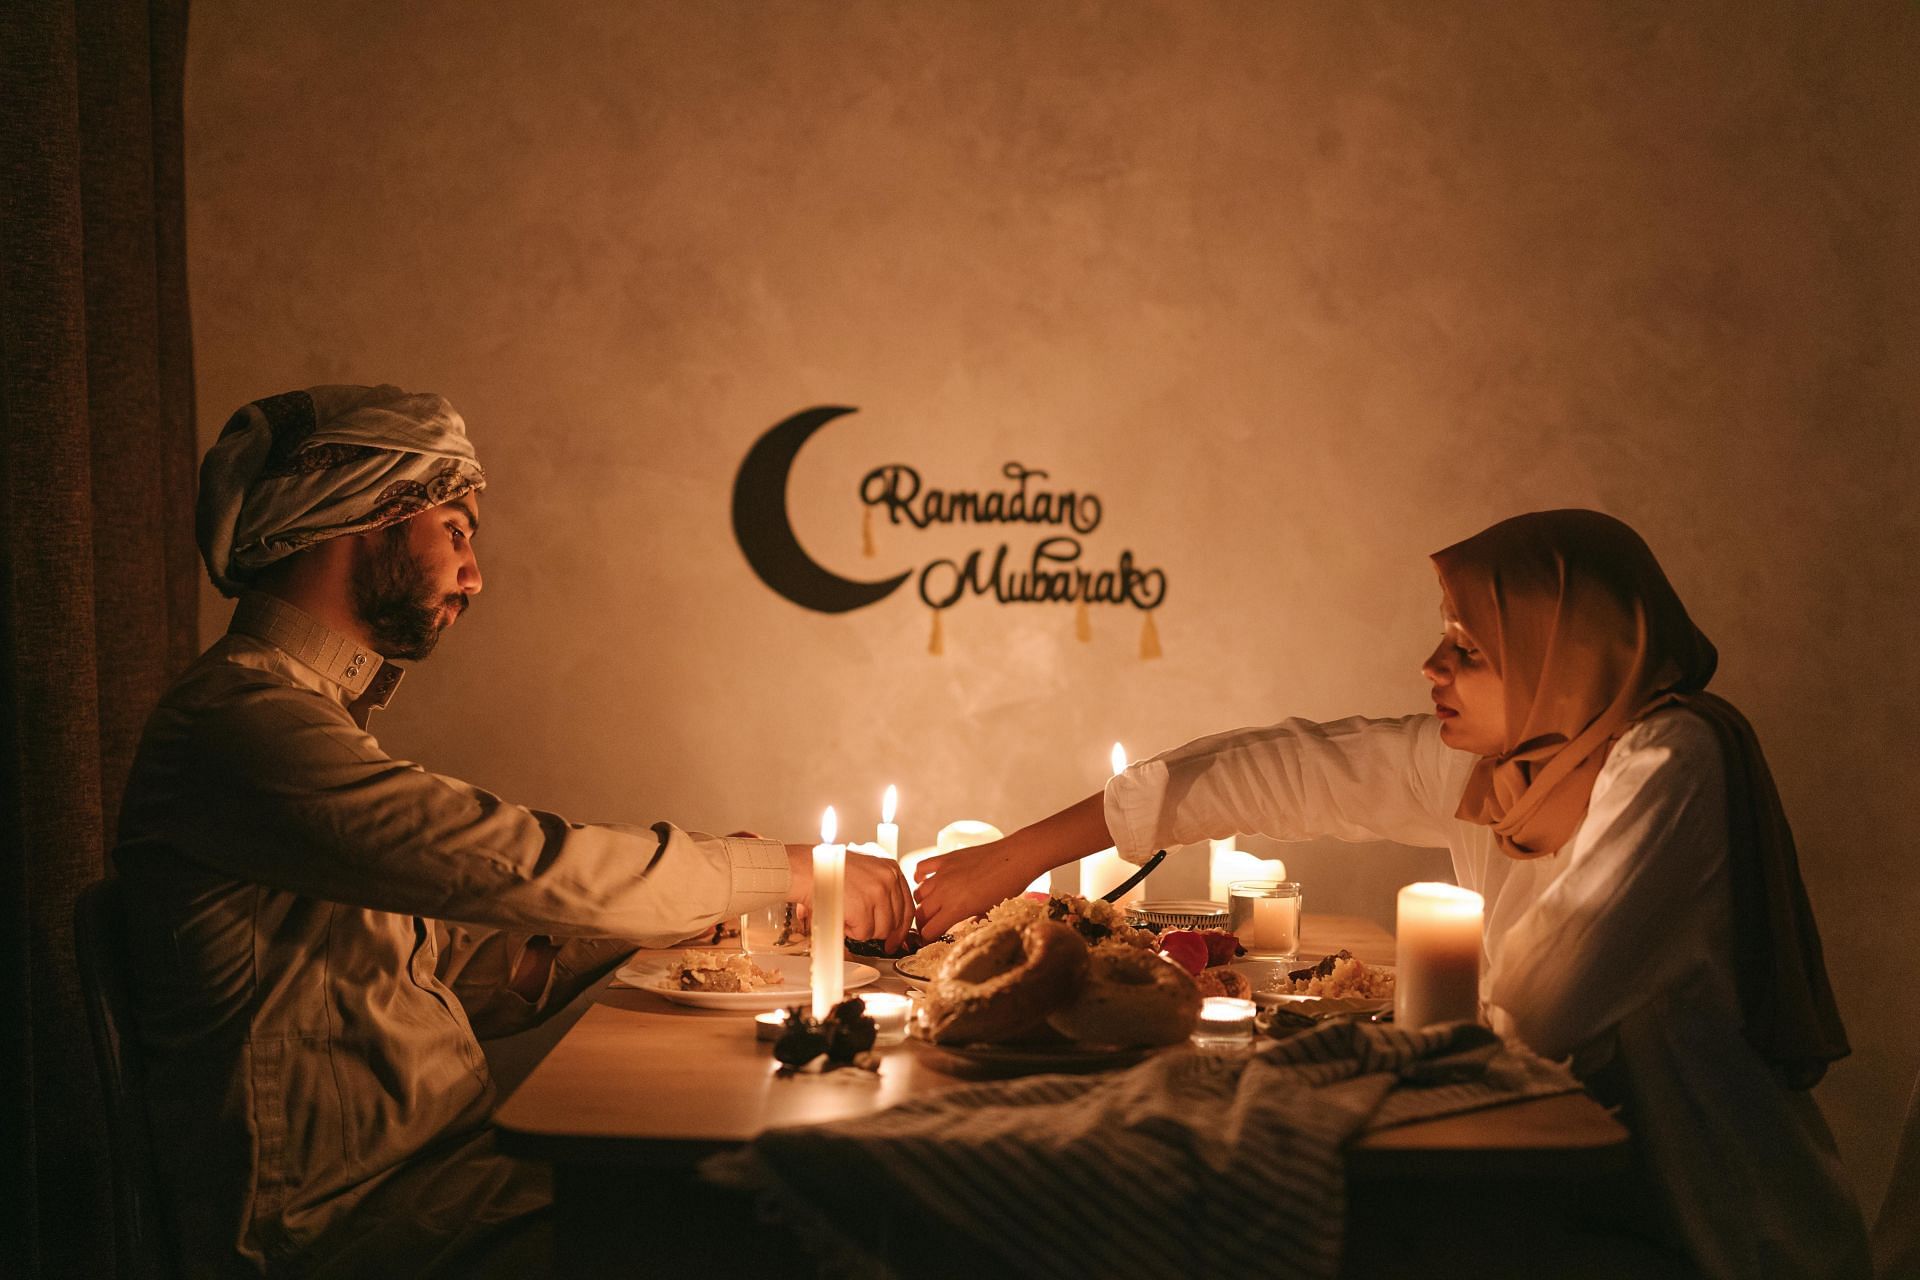 Benefits of fasting in ramadan (image sourced via Pexels / Photo by third)